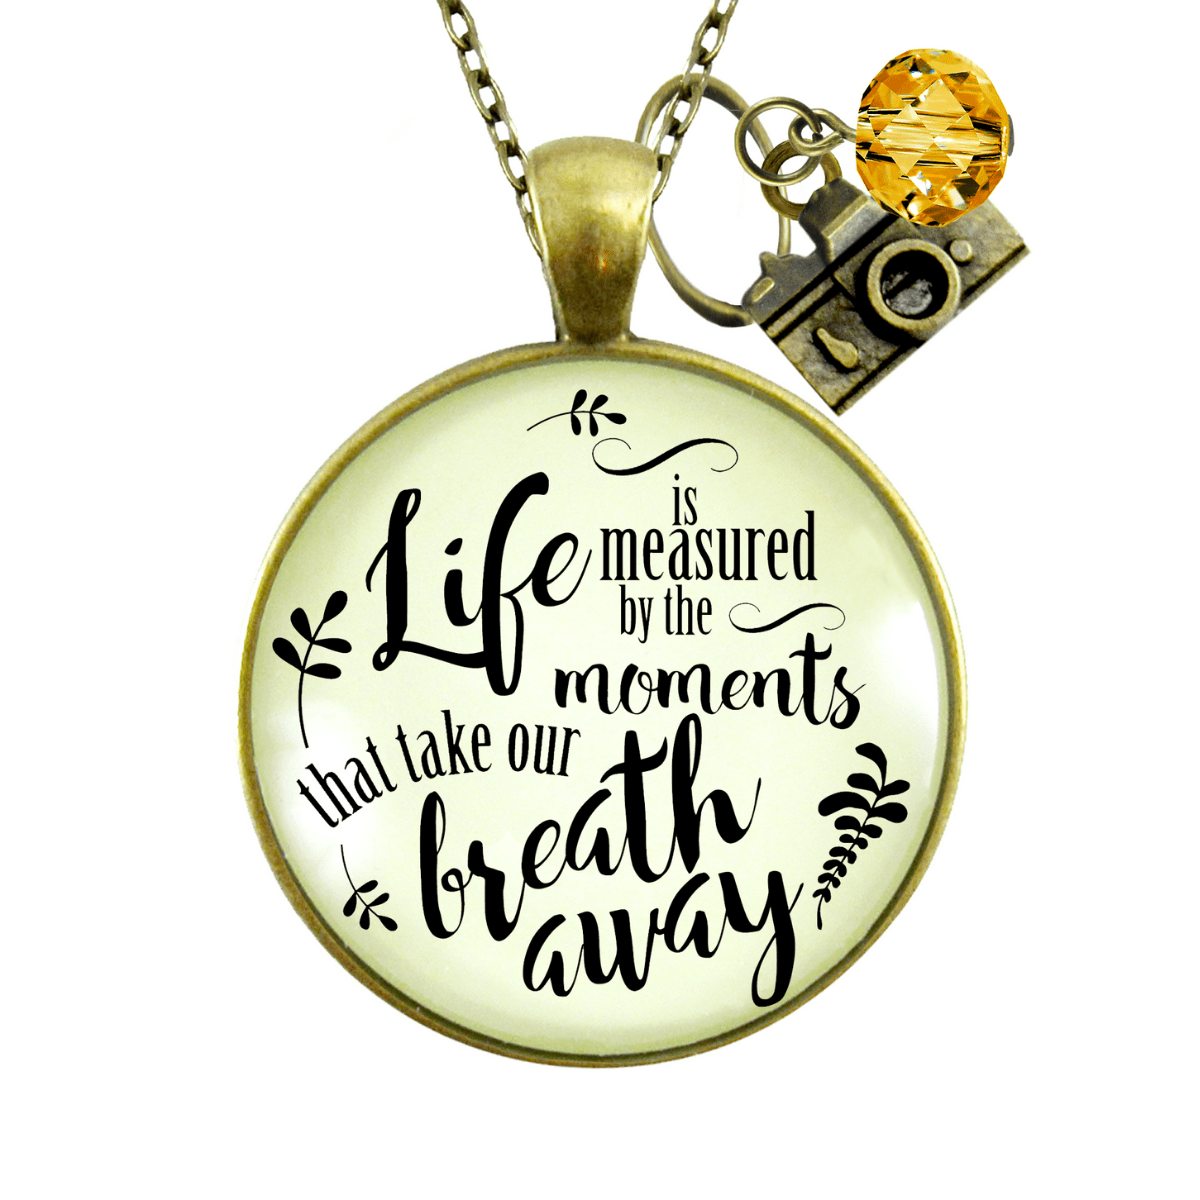 Gutsy Goodness Life Necklace Measured By Moments That Take Our Breath Away Jewelry - Gutsy Goodness;Life Necklace Measured By Moments That Take Our Breath Away Jewelry - Gutsy Goodness Handmade Jewelry Gifts